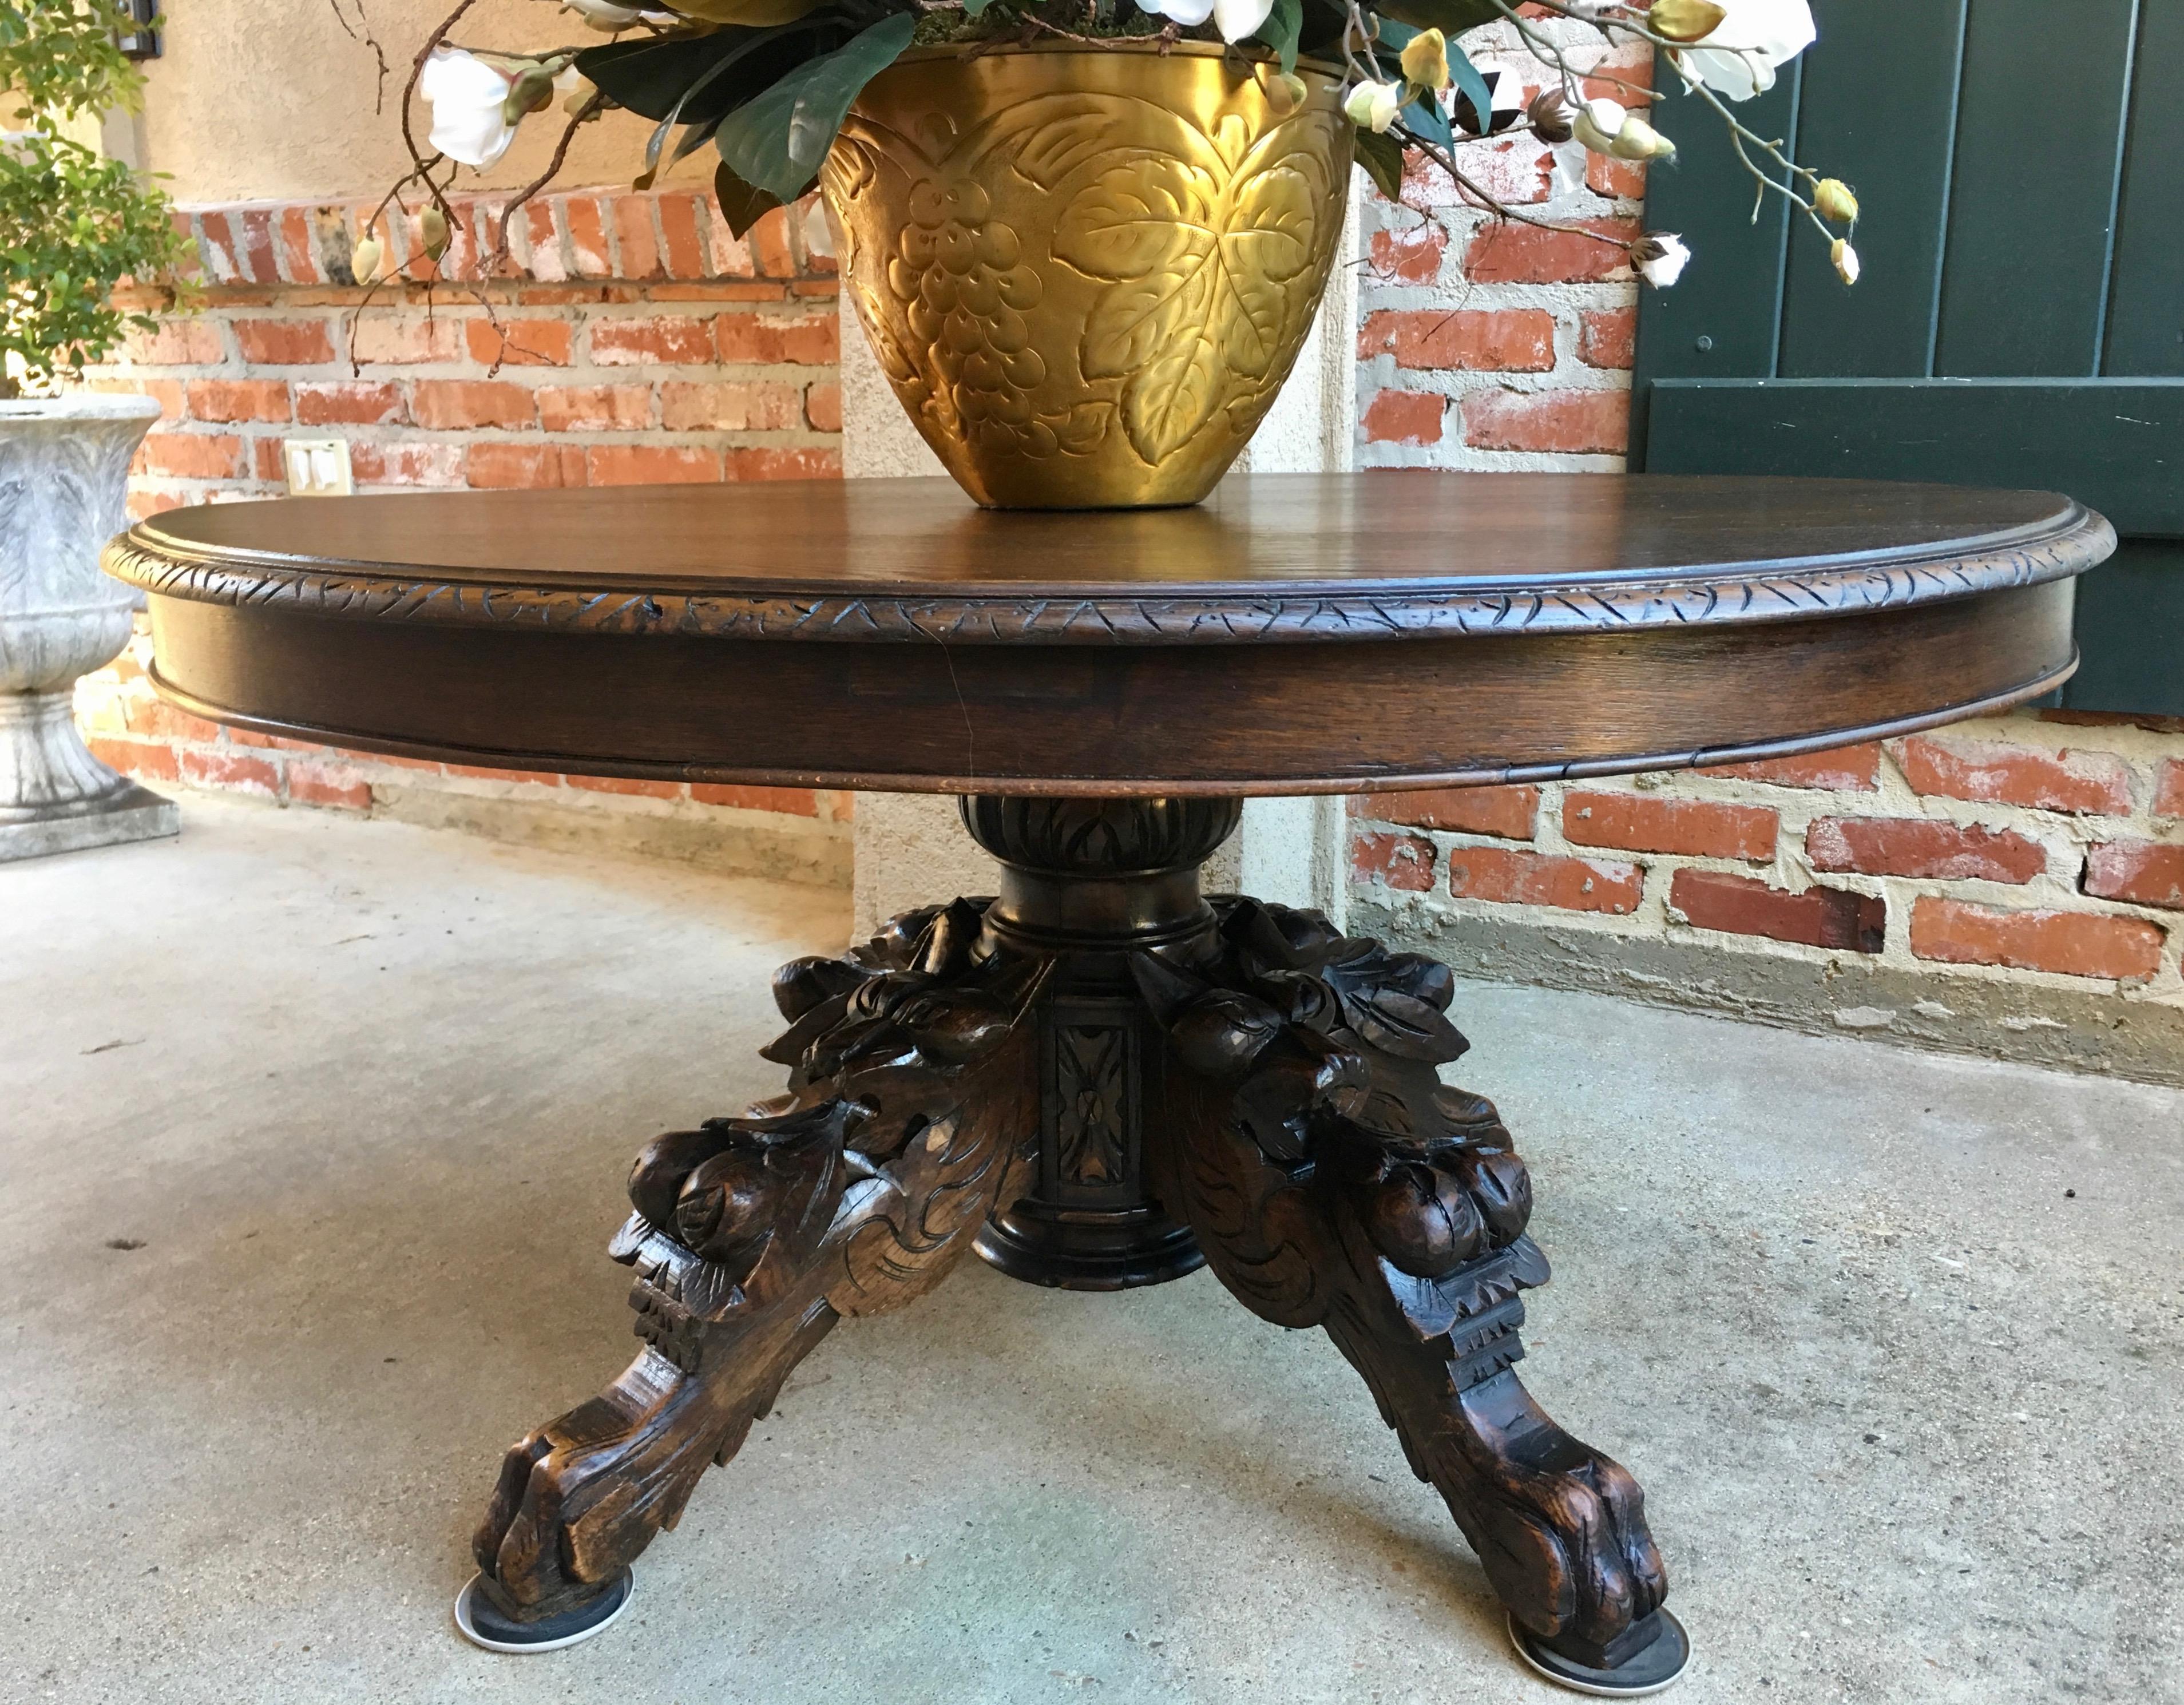 Direct from France, a stunning antique French carved Black Forest oval coffee table!
~Massive carved pedestal base supported by ornate hand carved dimensional griffins on all four legs with Black Forest details~
~Solid oak, the oval table top is